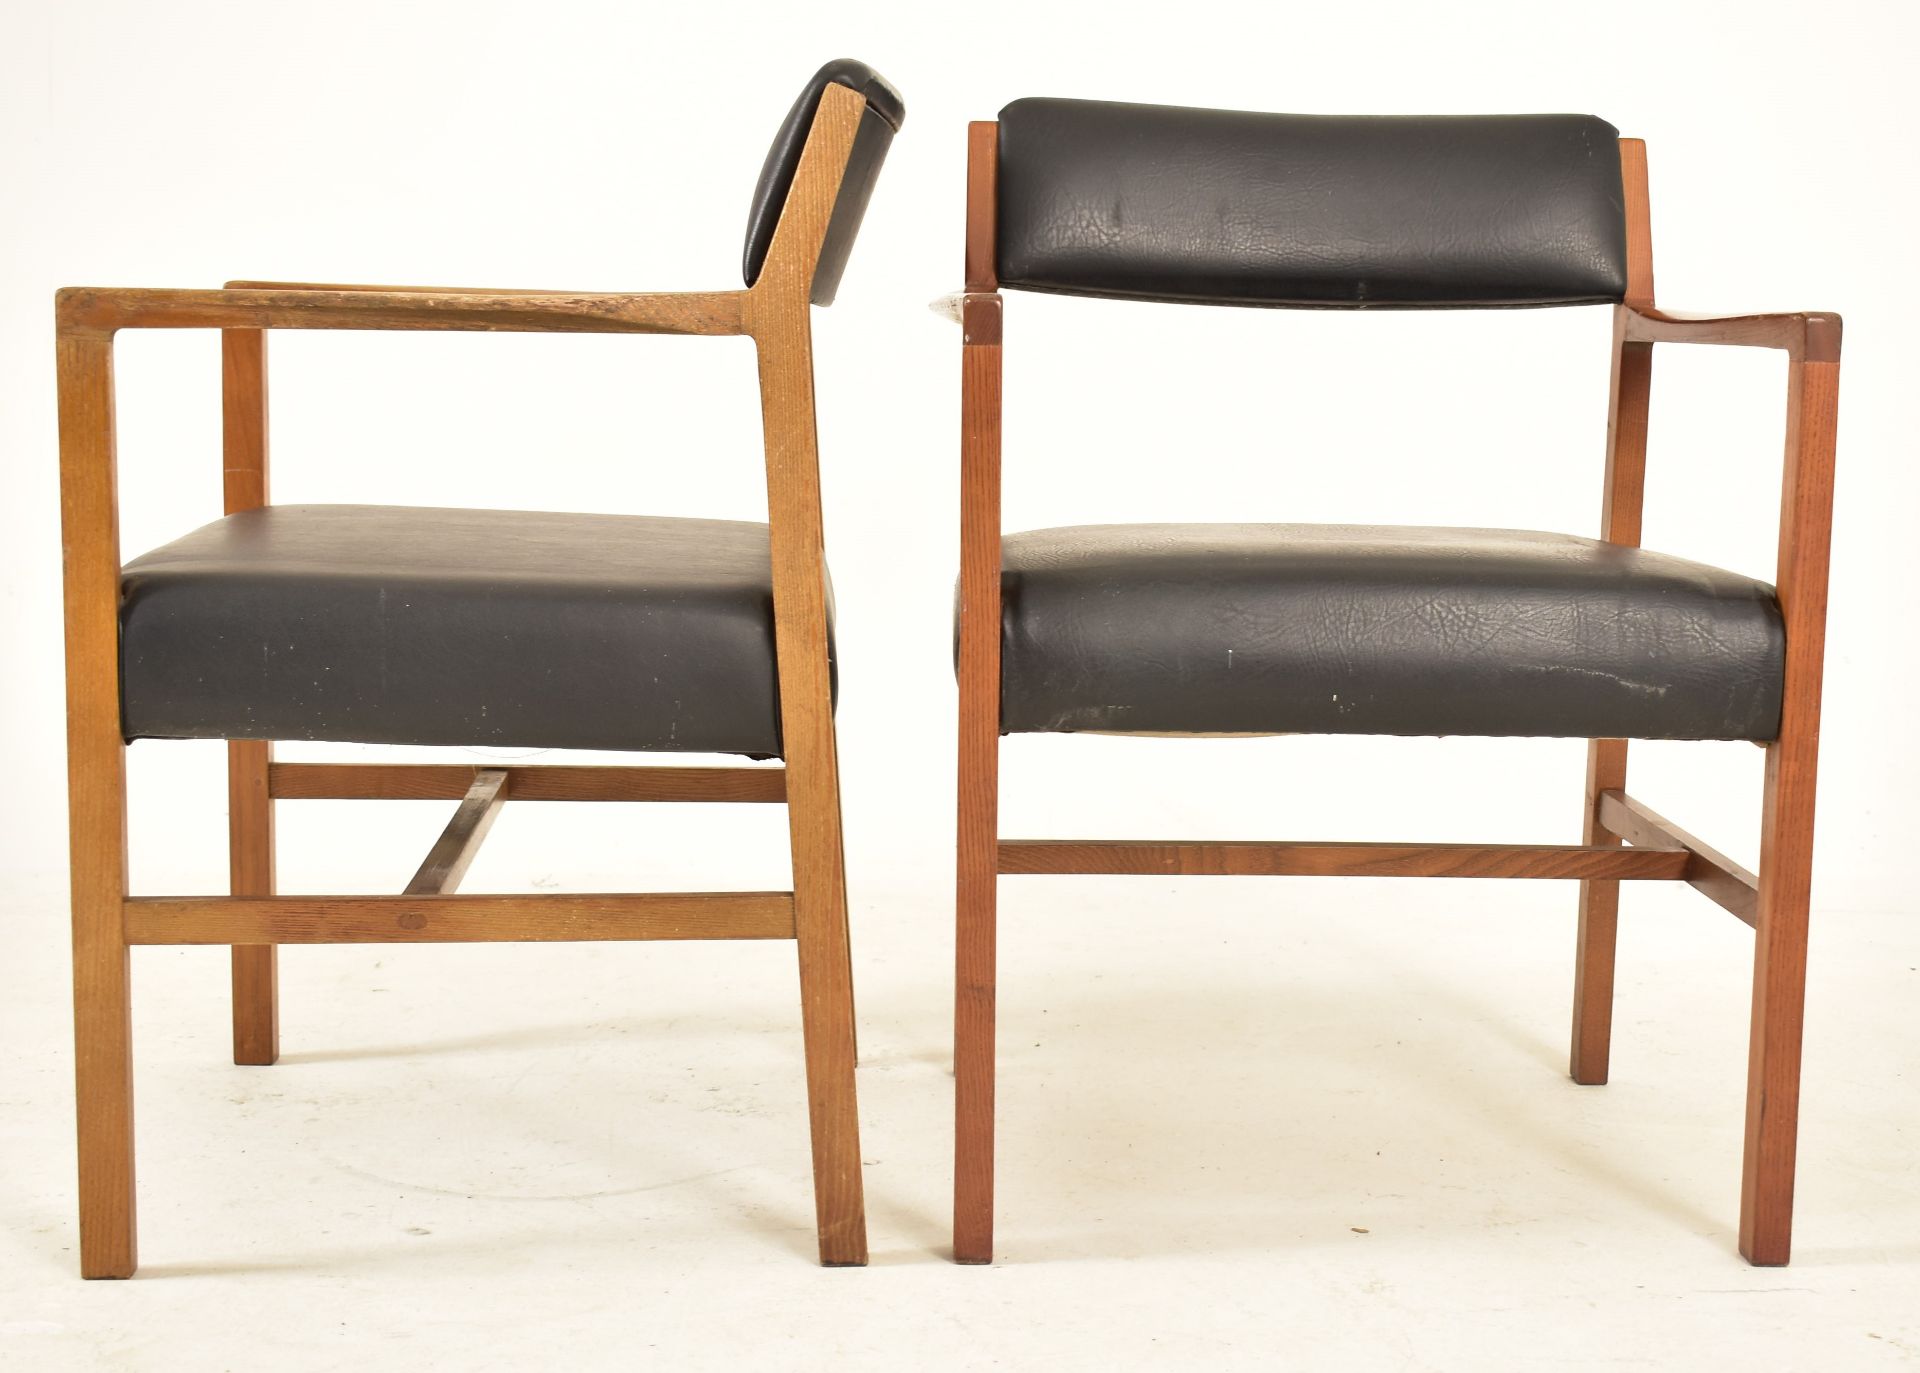 ALFRED COX - MATCHING SET OF SIX TEAK DINING CHAIRS - Image 2 of 7